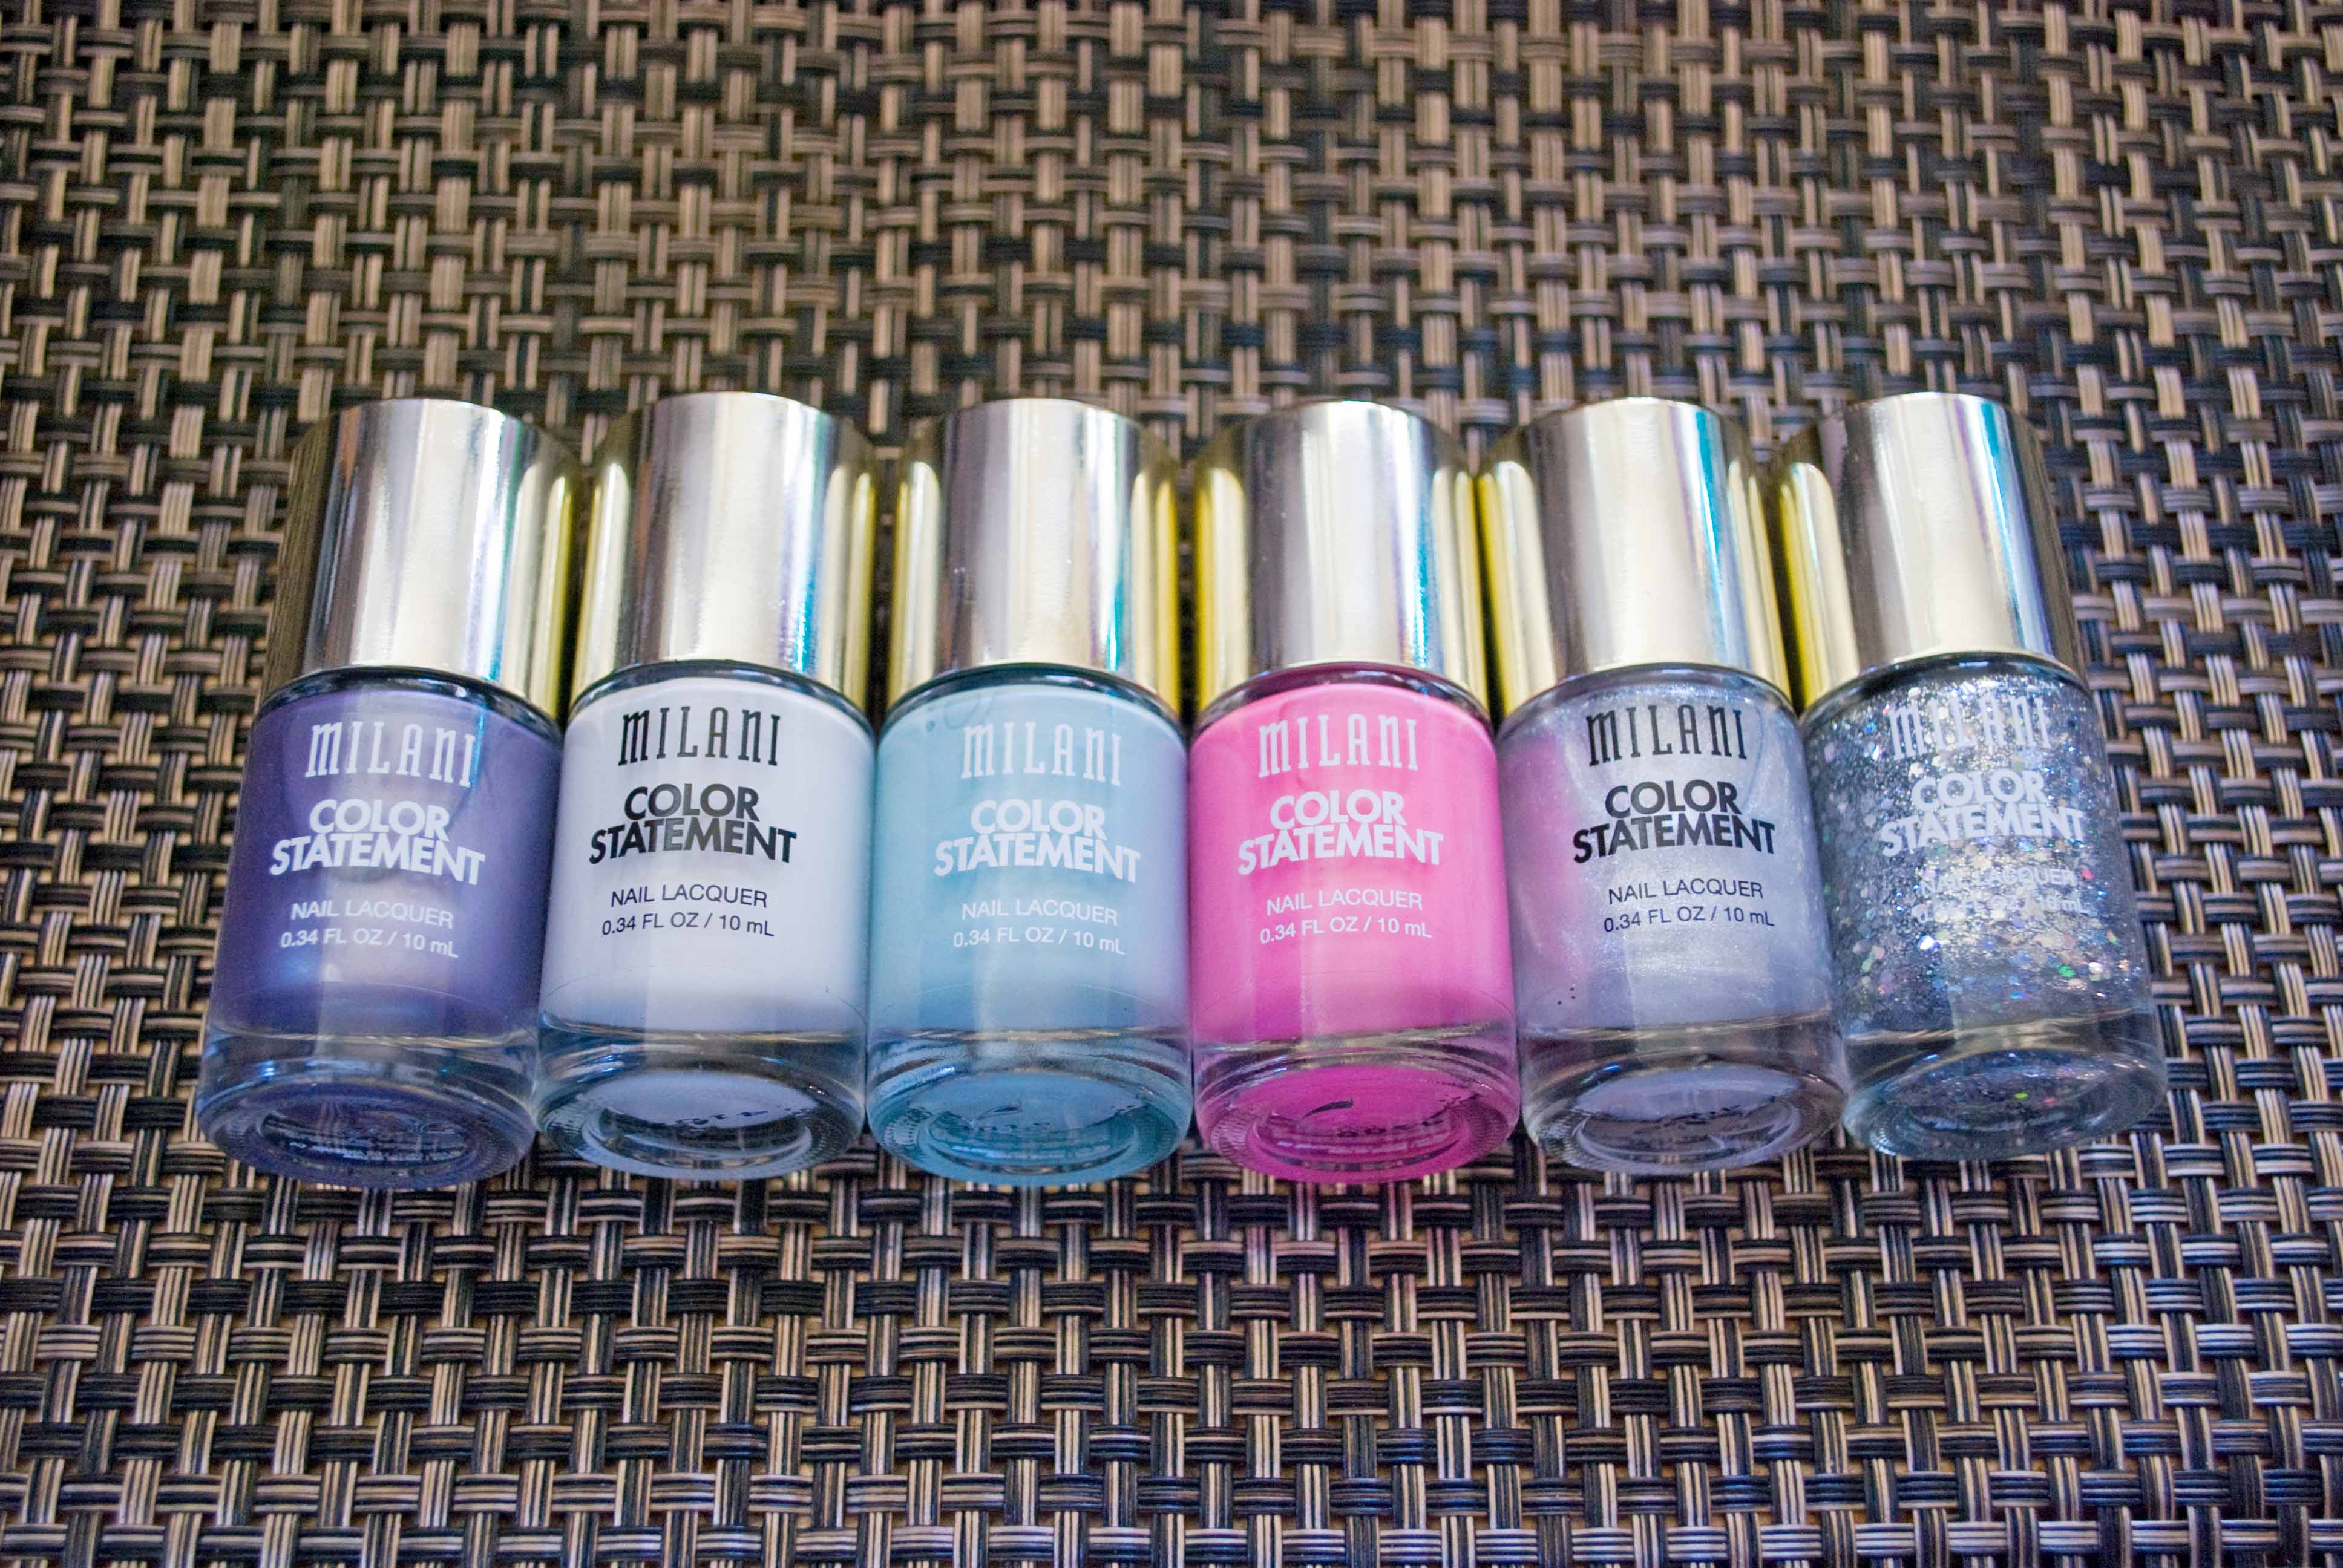 MIlani Color Statement Nail Lacquers